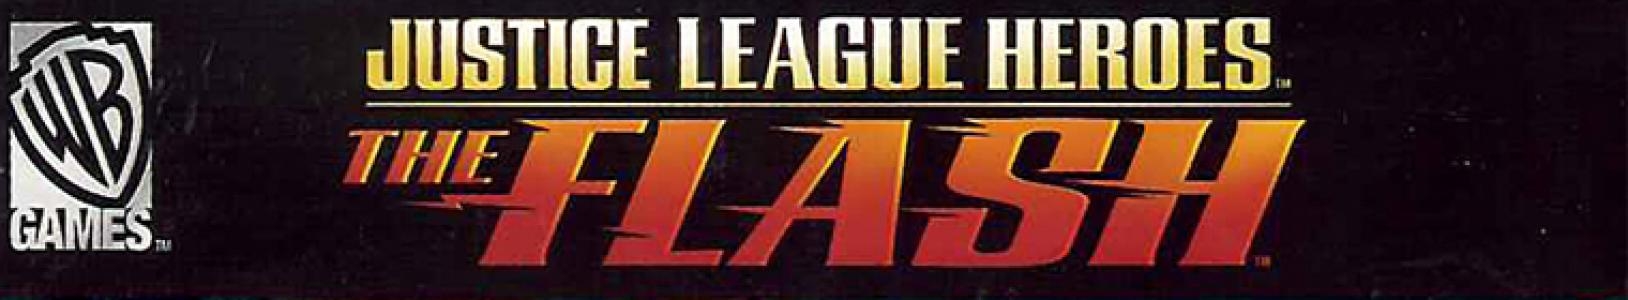 Justice League Heroes: The Flash banner